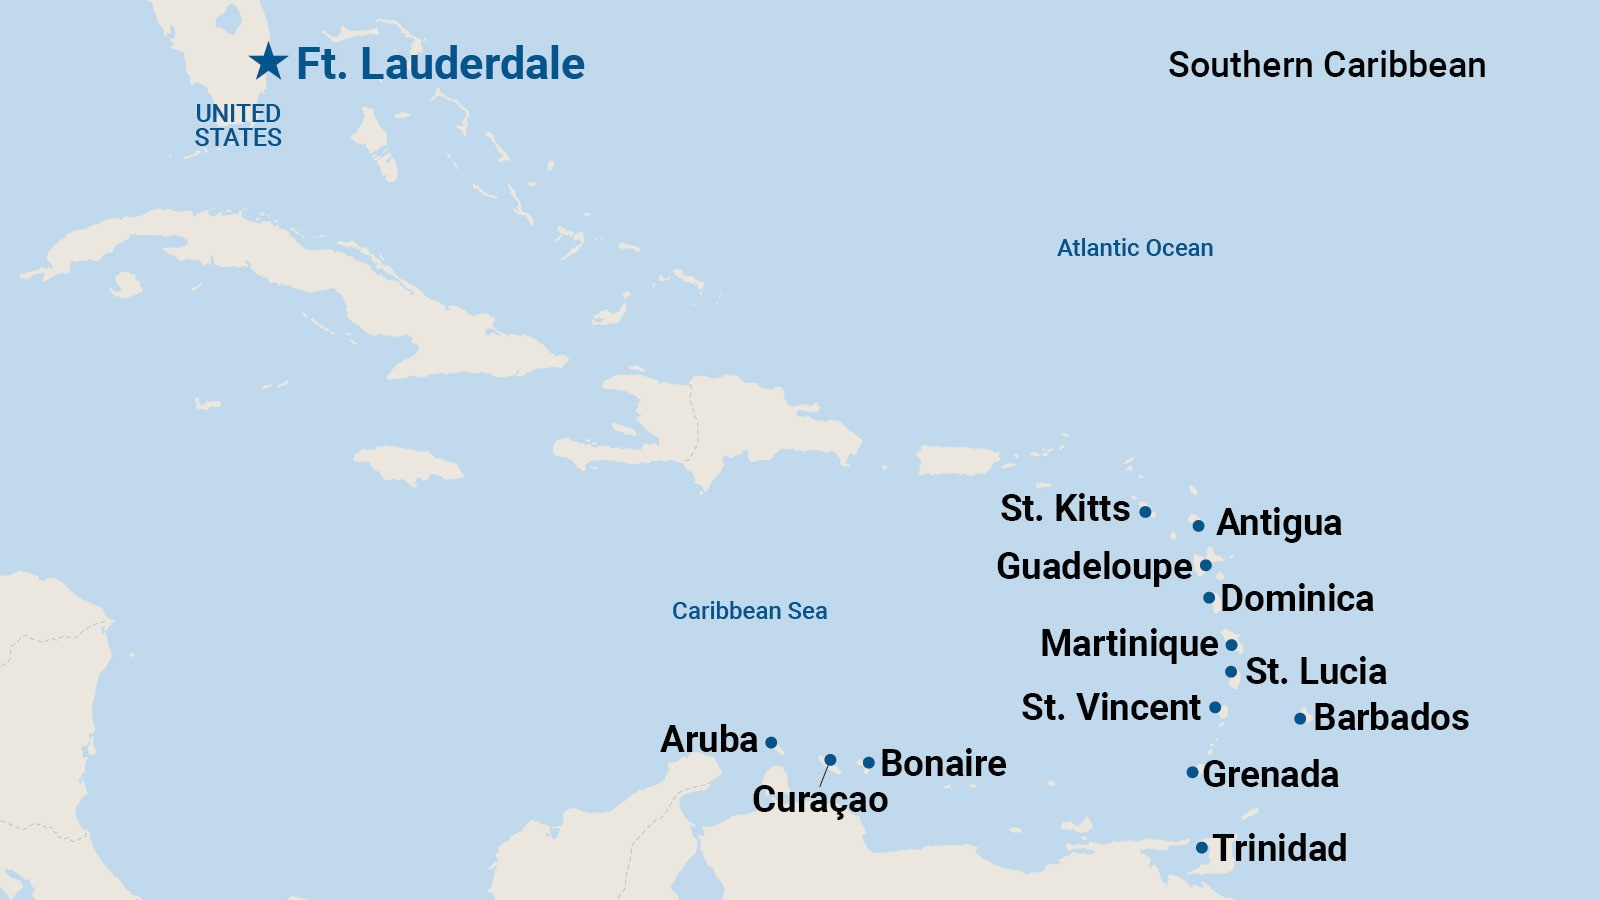 best southern caribbean cruise ports